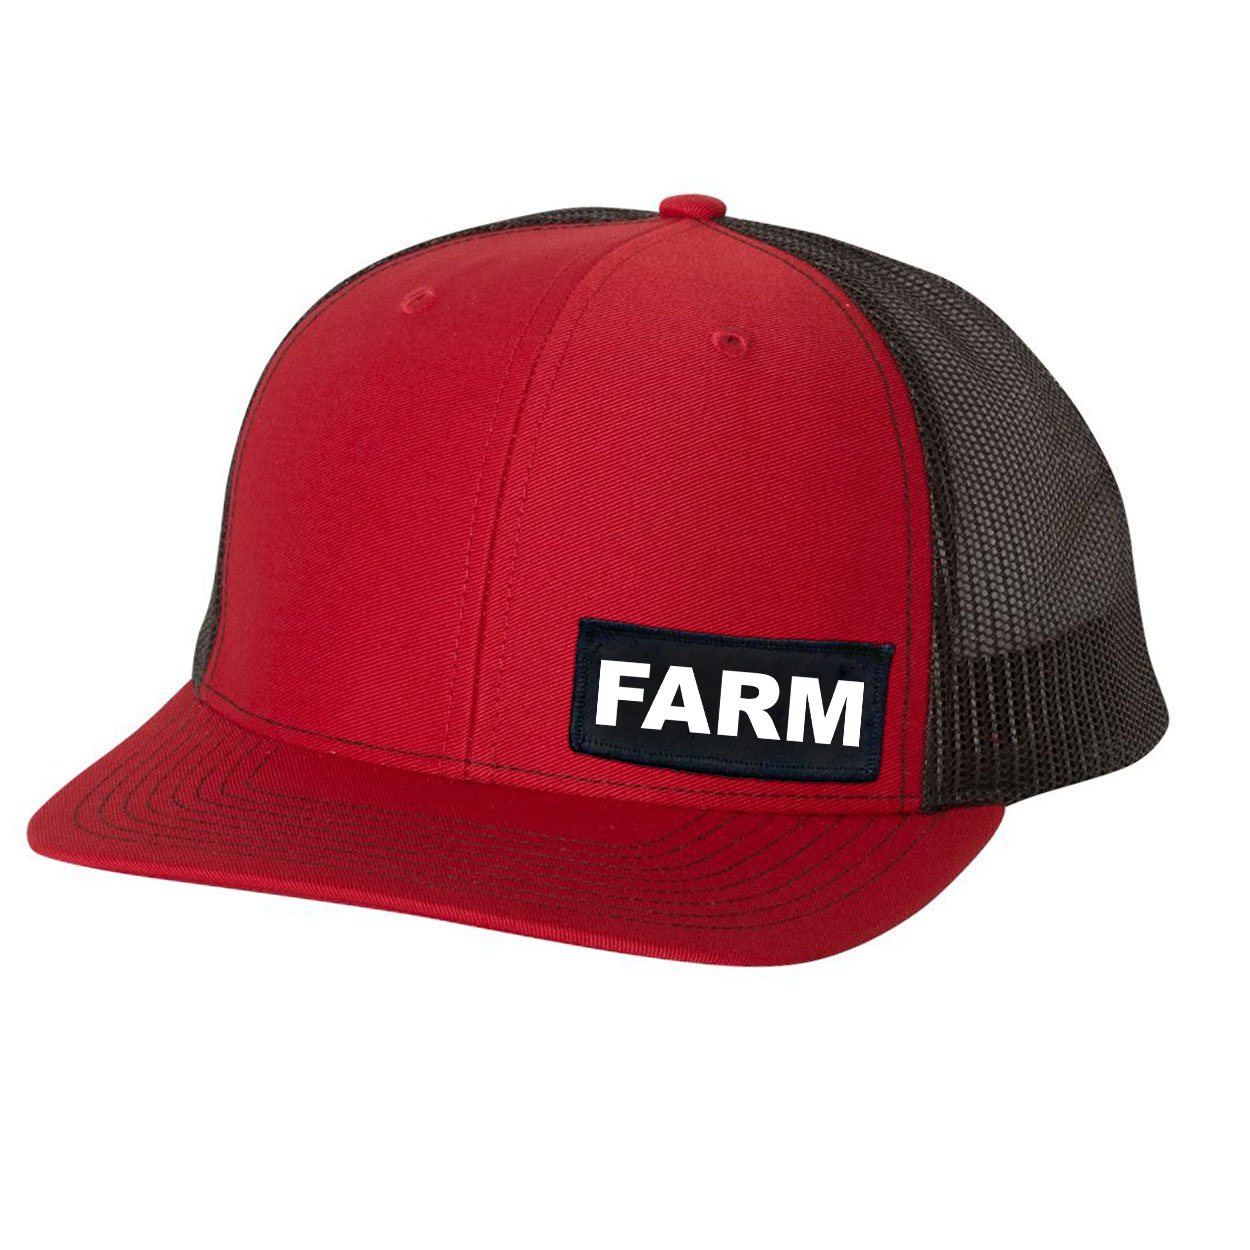 Farm Brand Logo Night Out Woven Patch Snapback Trucker Hat Red/Black